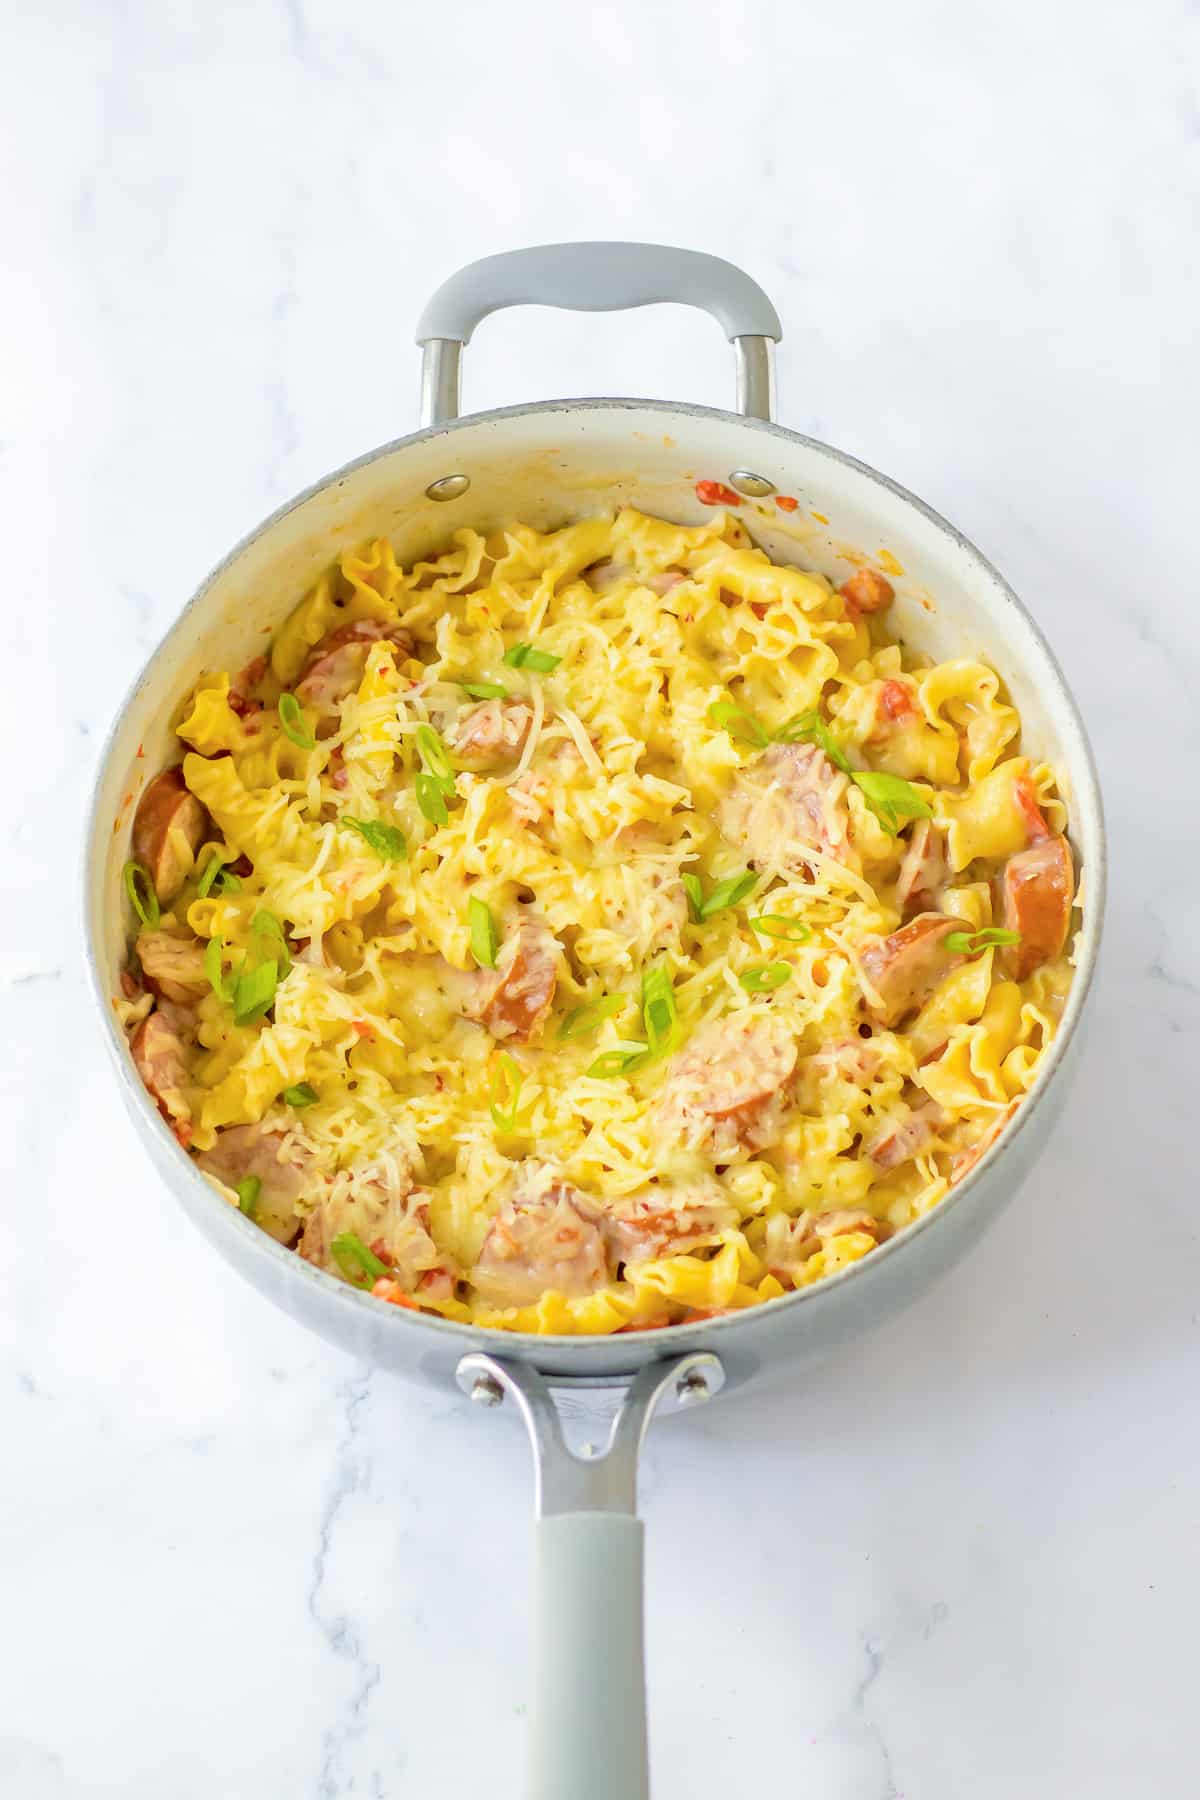 A pan full of cooked smoked sausage and pasta with melted cheese on top.